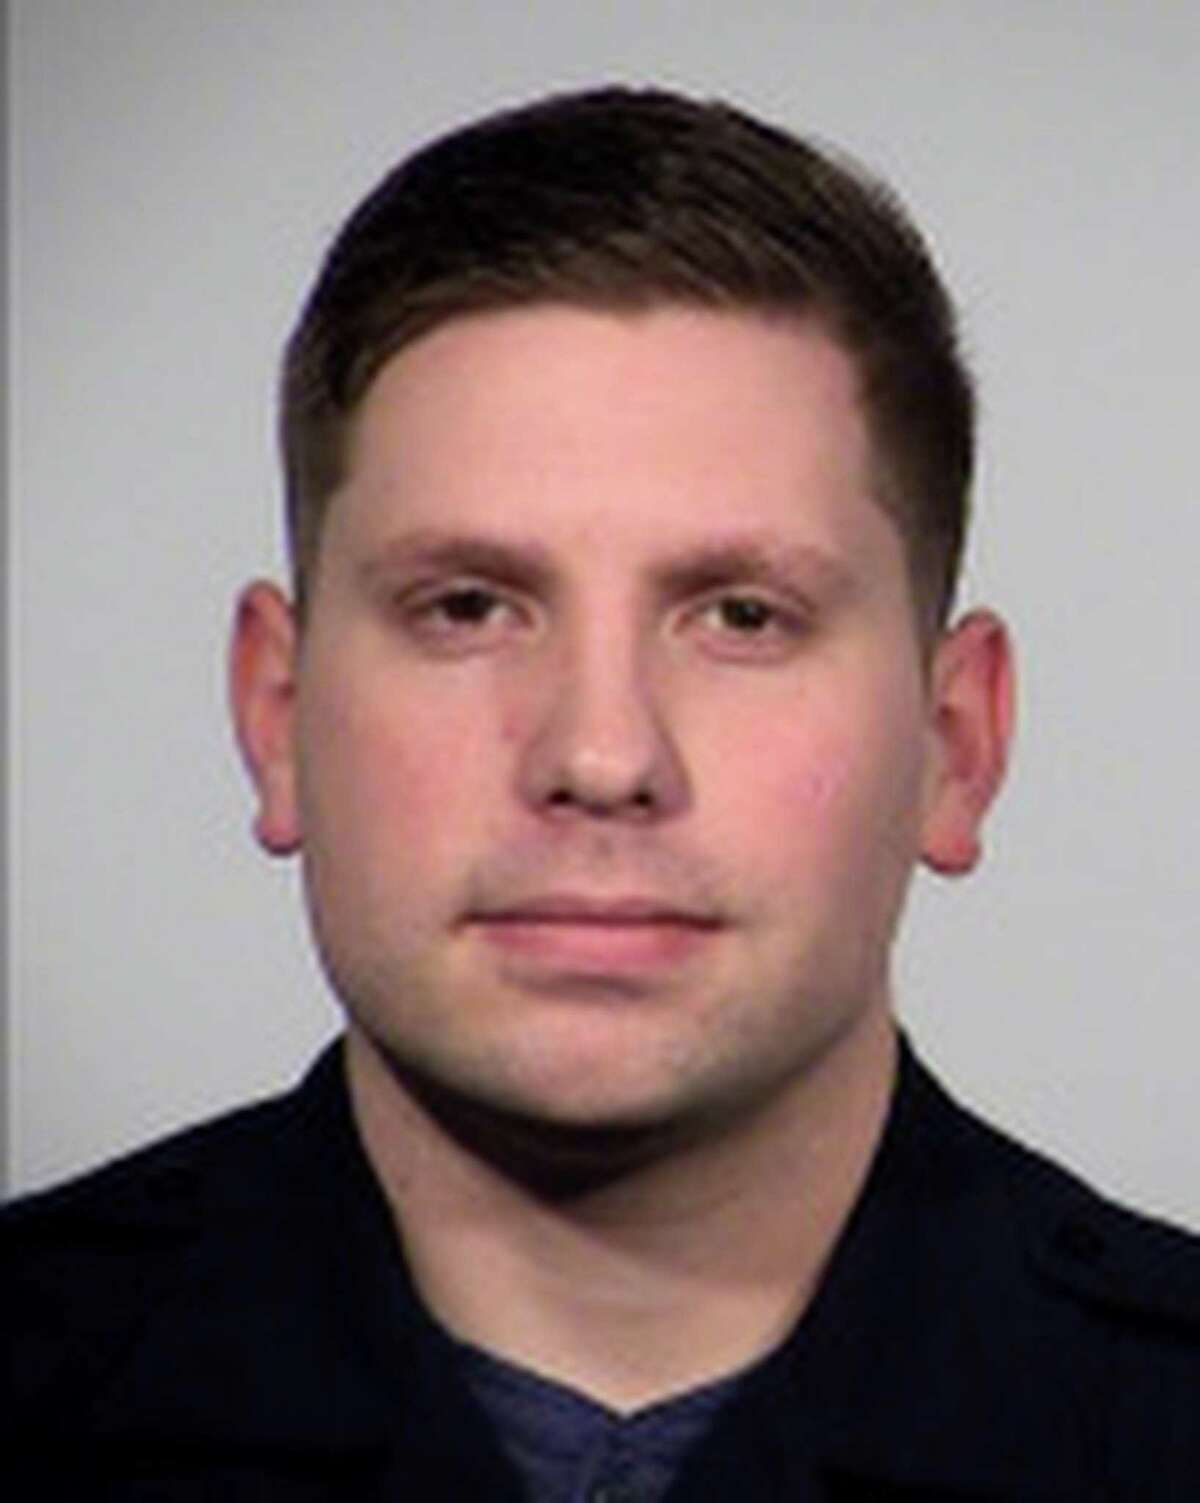 San Antonio Police Department officer Marshall Shepard, seen in an undated courtesy photo provided by by the department on April 7, 2021, was indicted by a grand jury that same day on charges of official oppression and assault bodily injury.